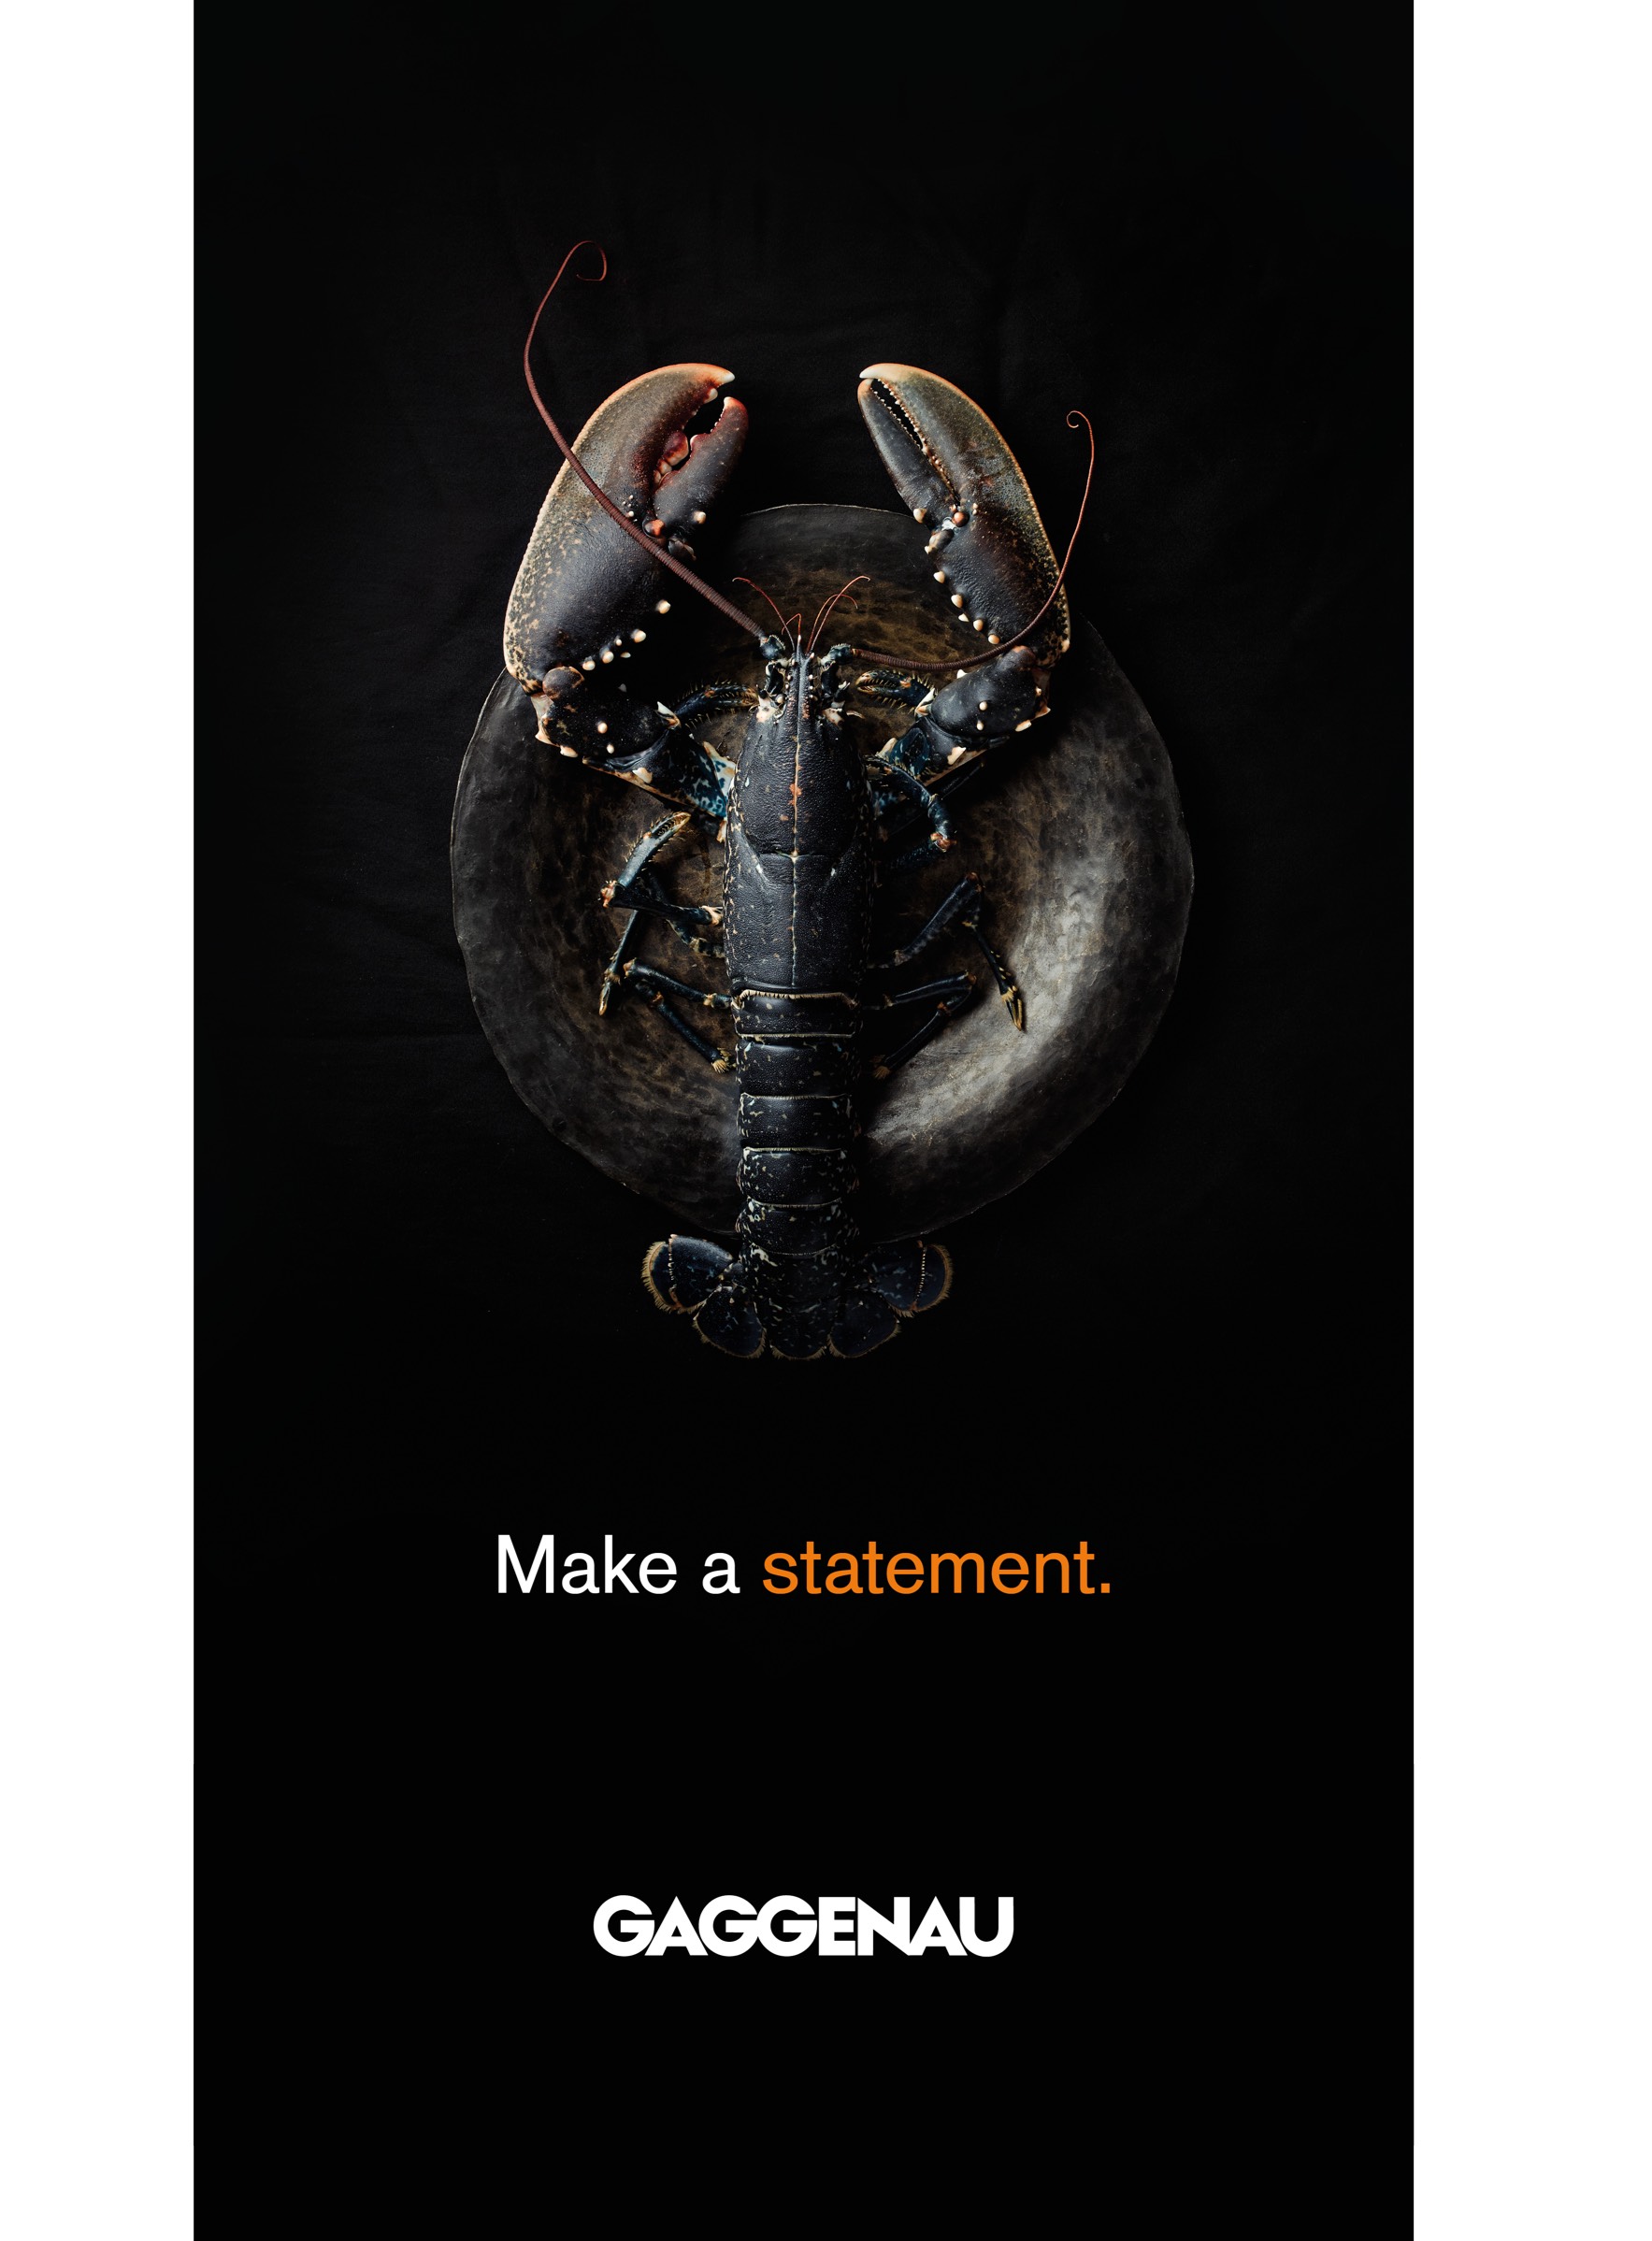 Gaggenau showroom poster, event collateral, lobster on a plate. Make a statement.